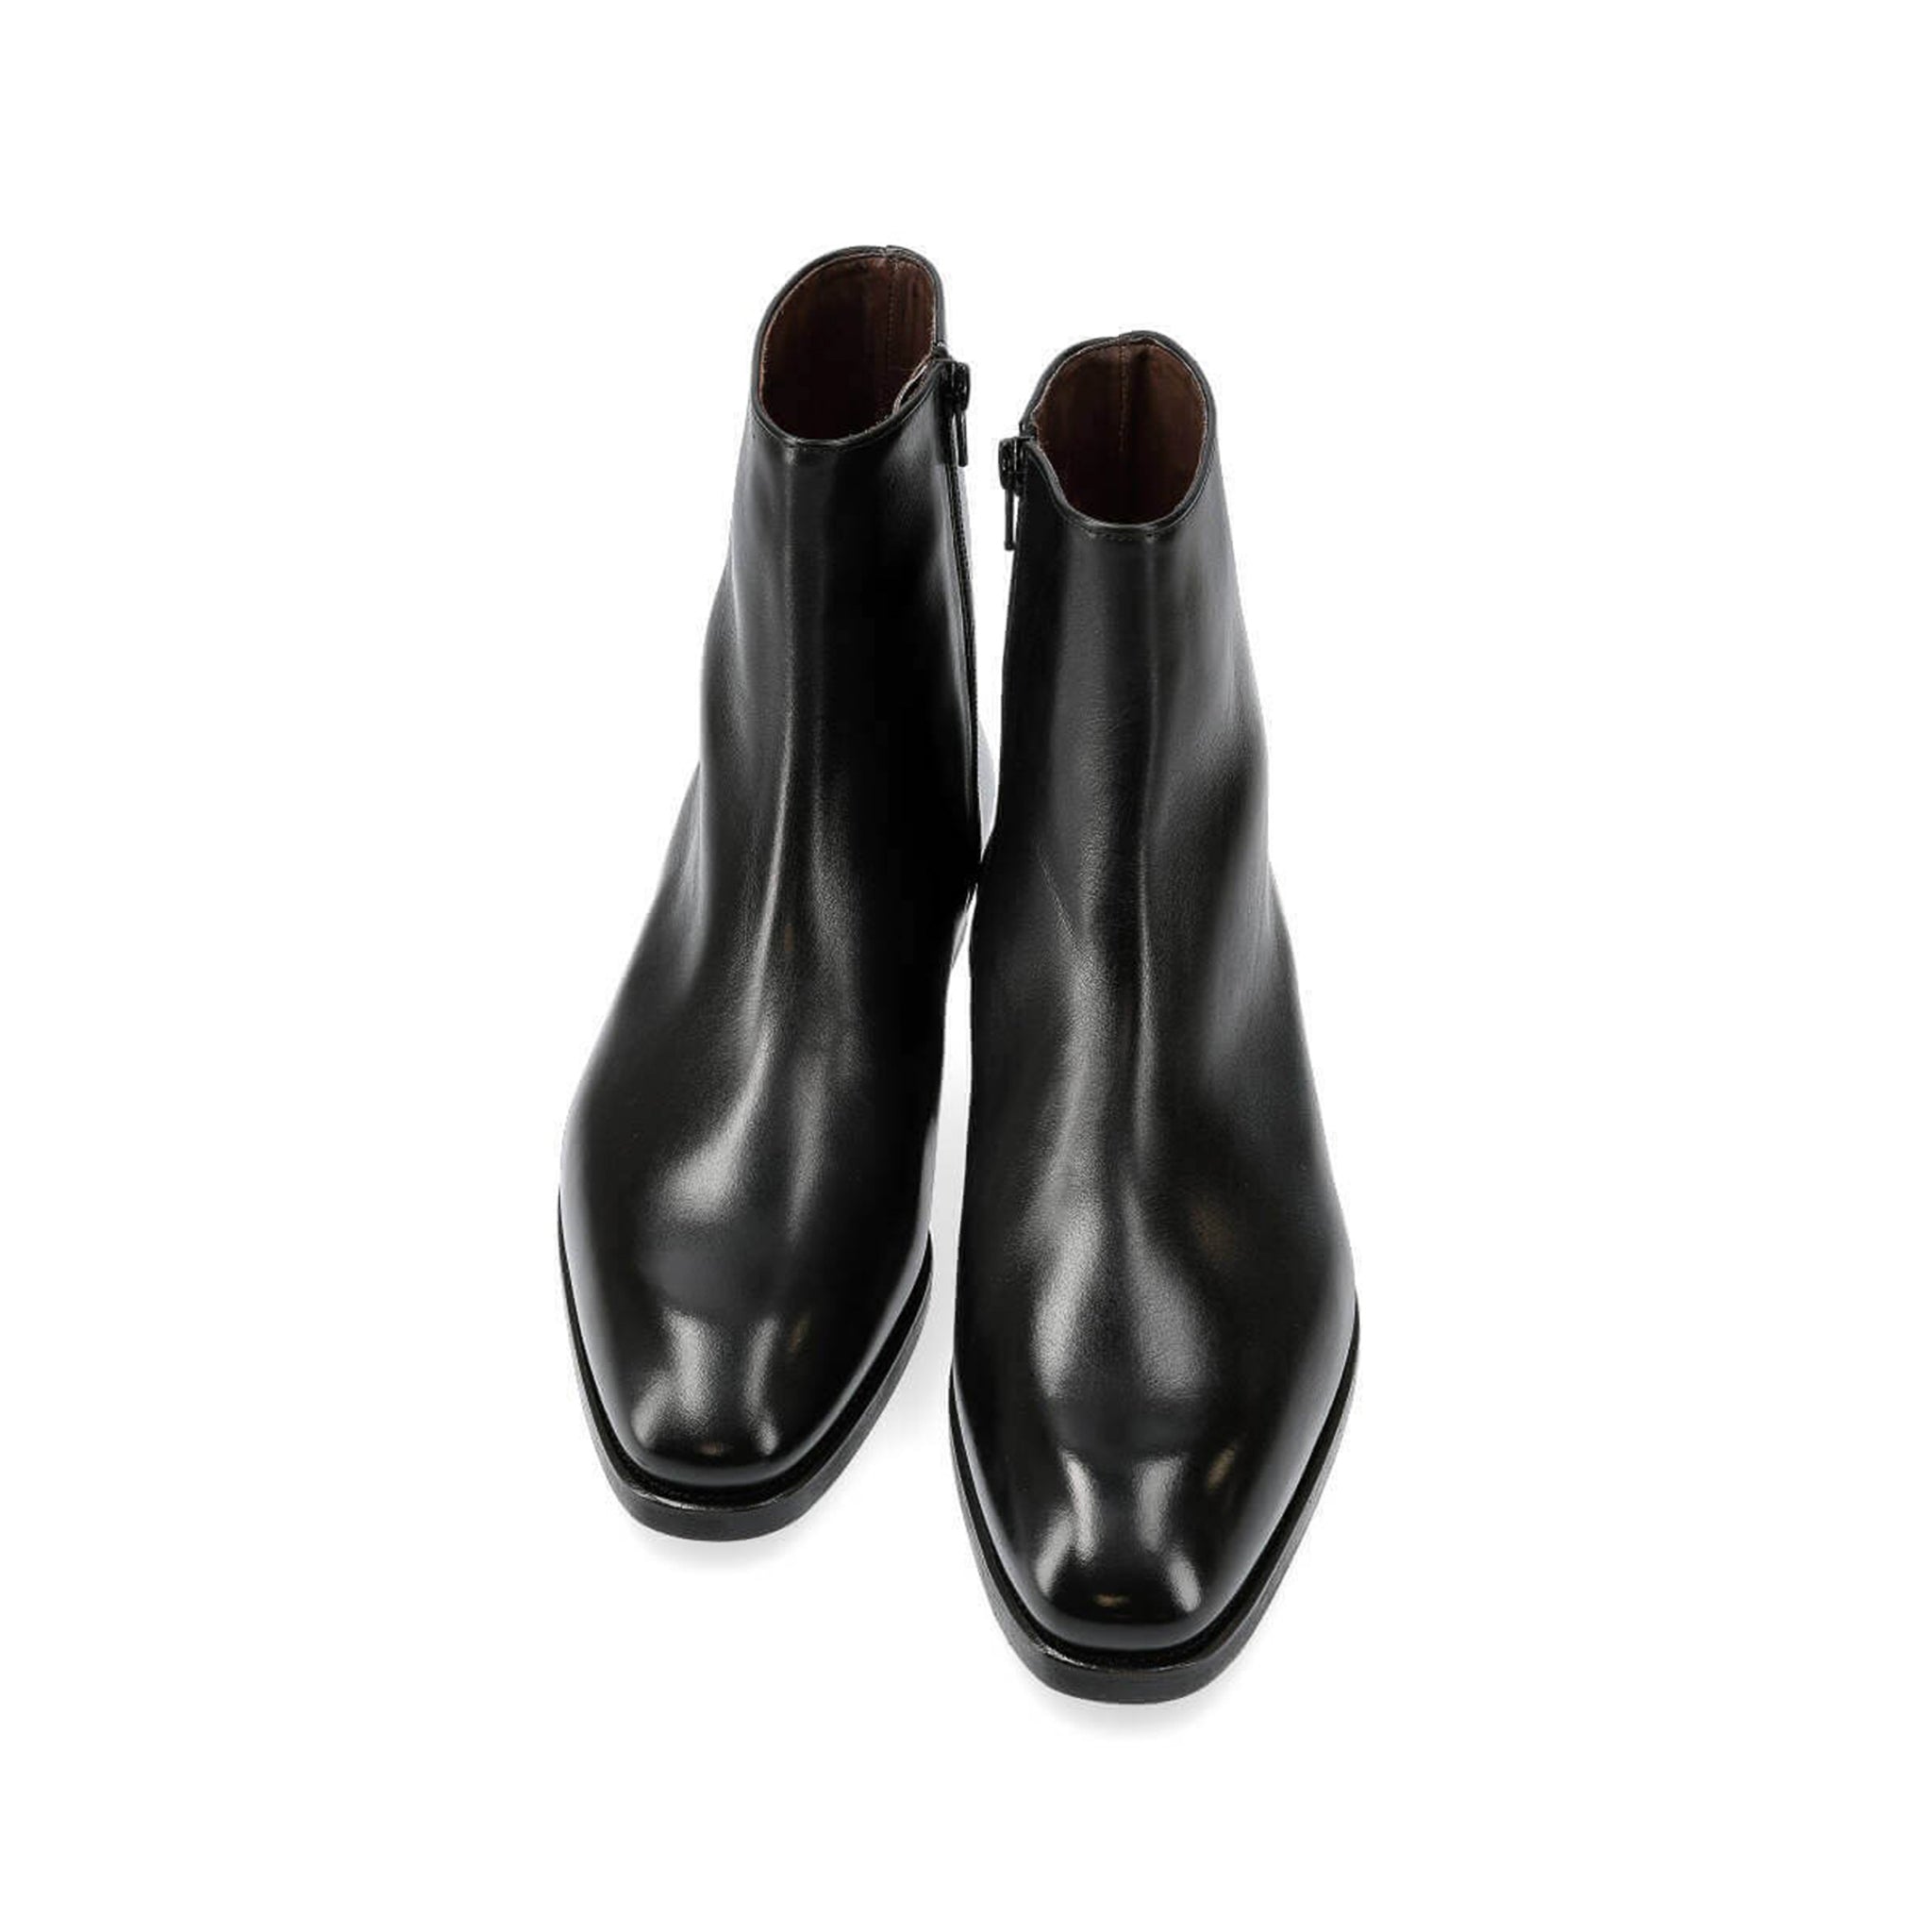 Classic Chelsea Black Leather Boots